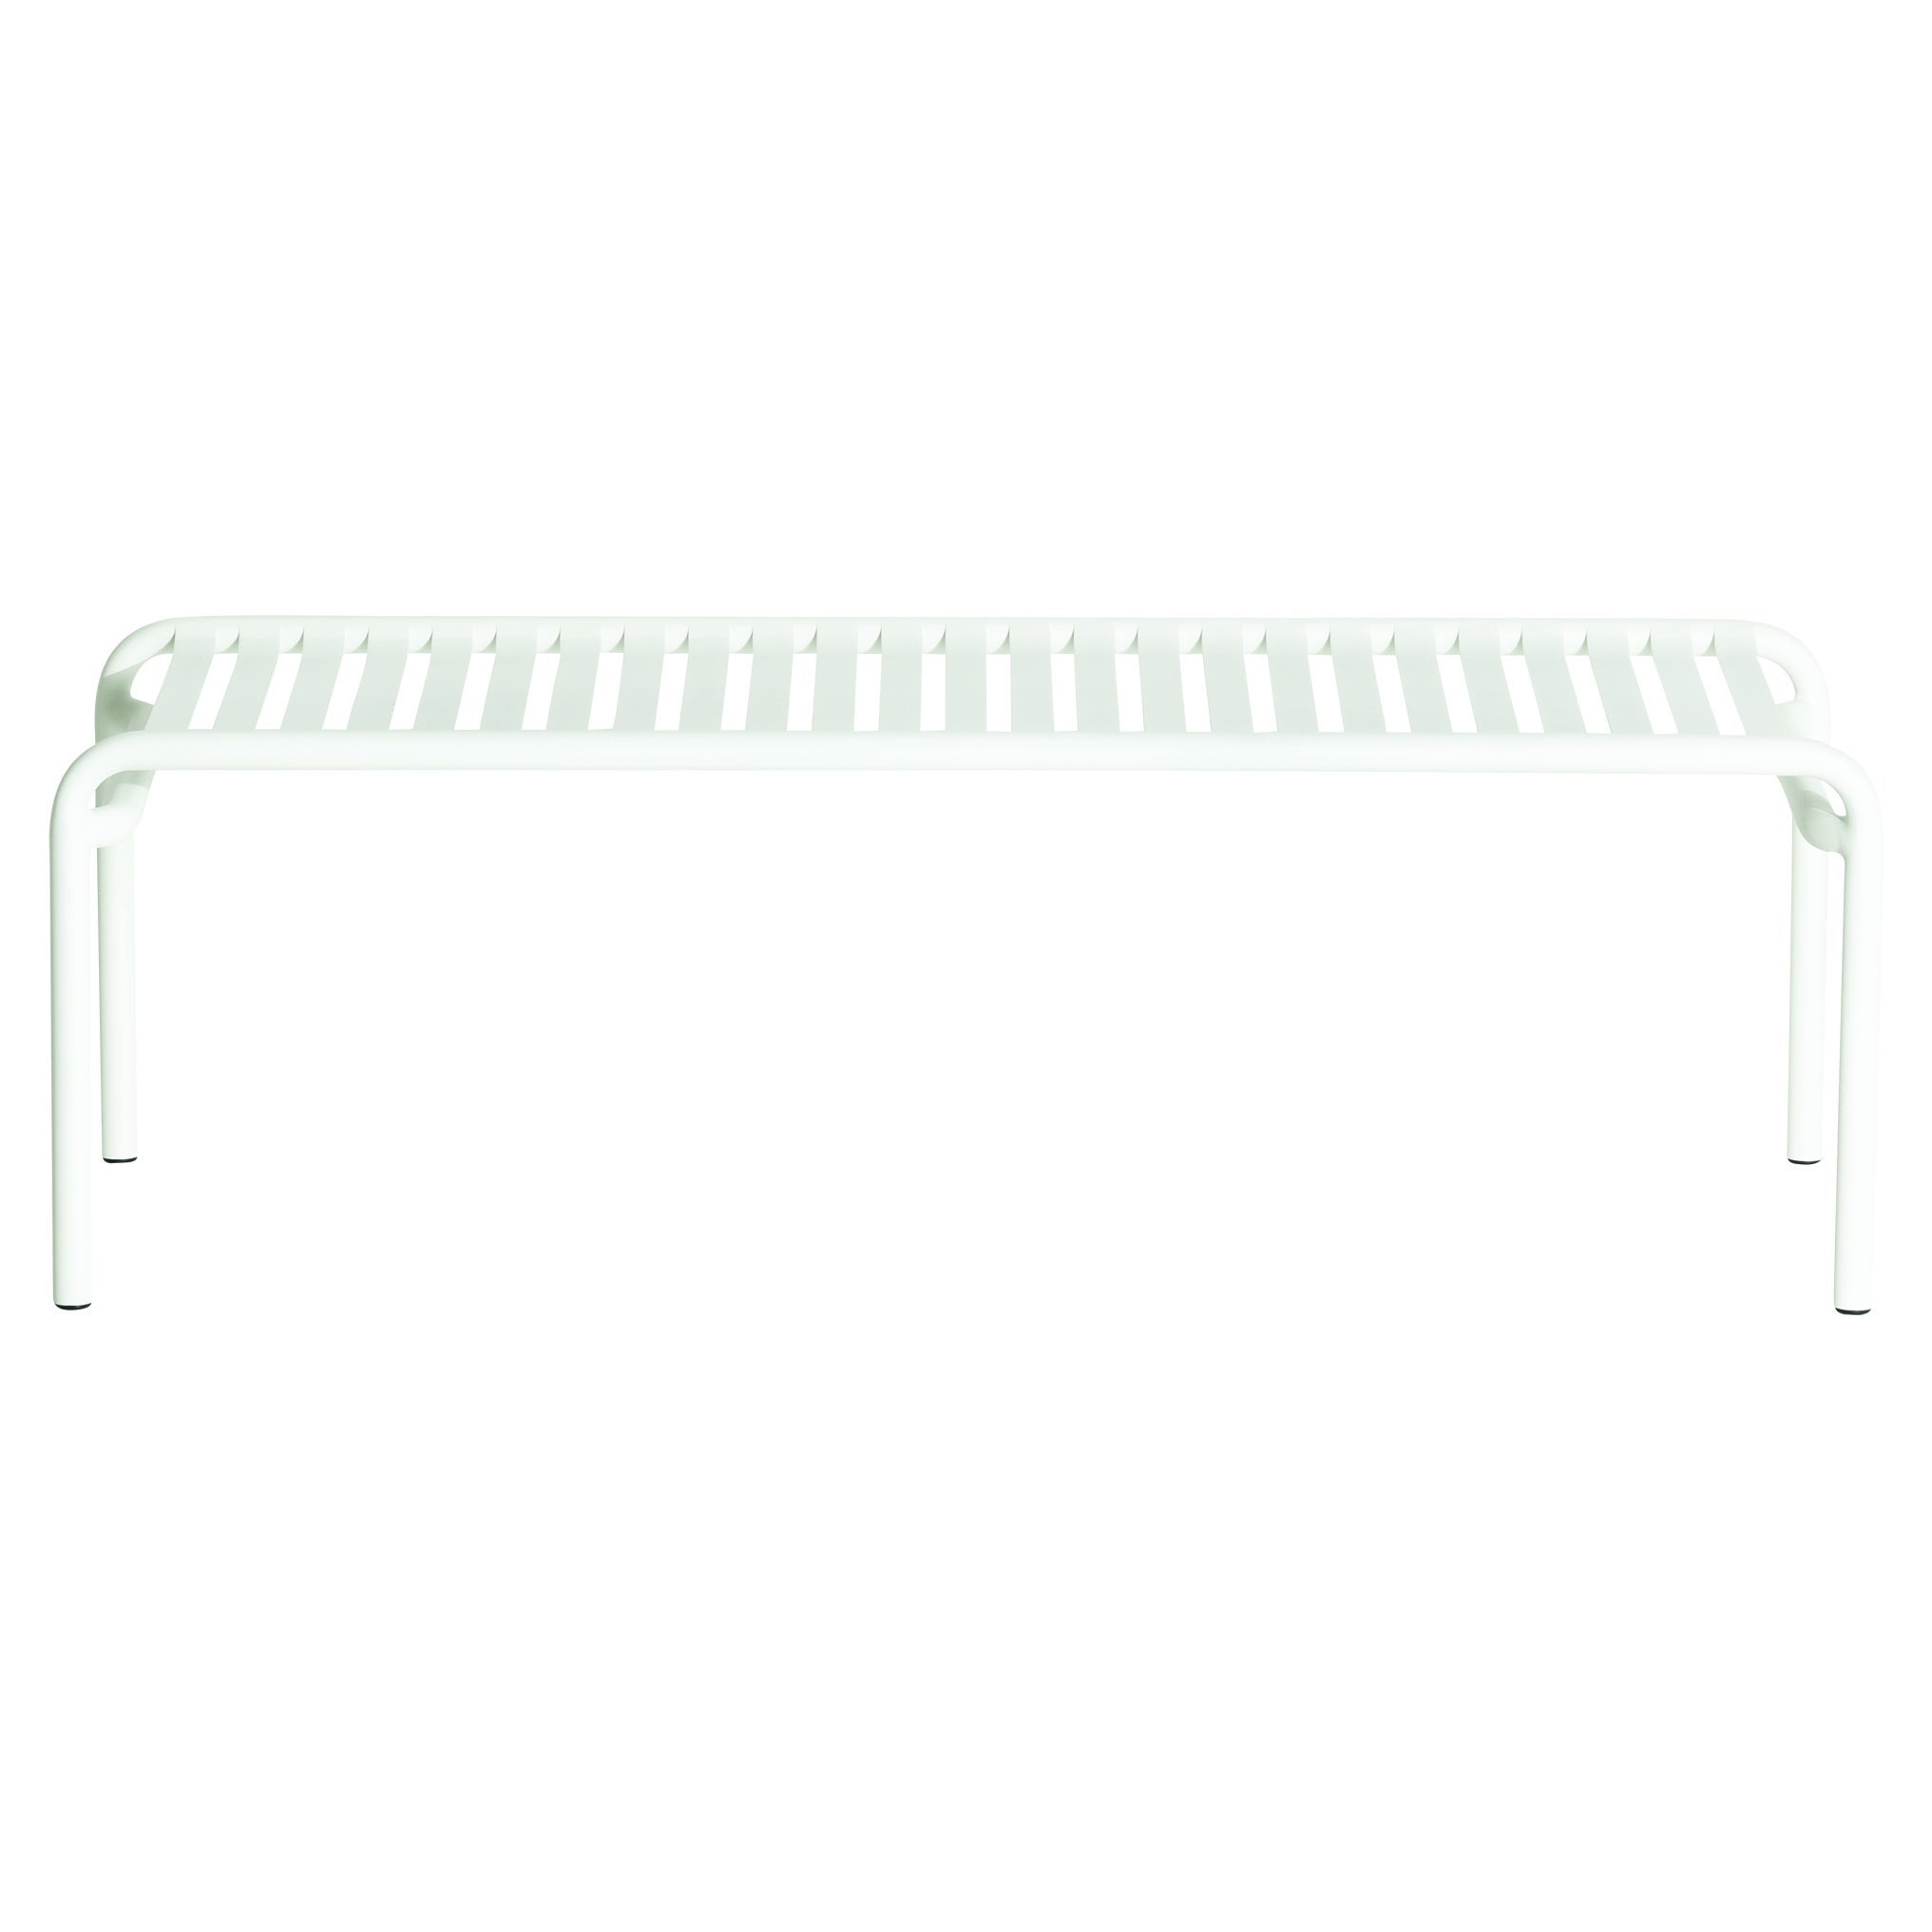 Petite Friture Week-End Long Coffee Table in White Aluminium, 2017 For Sale